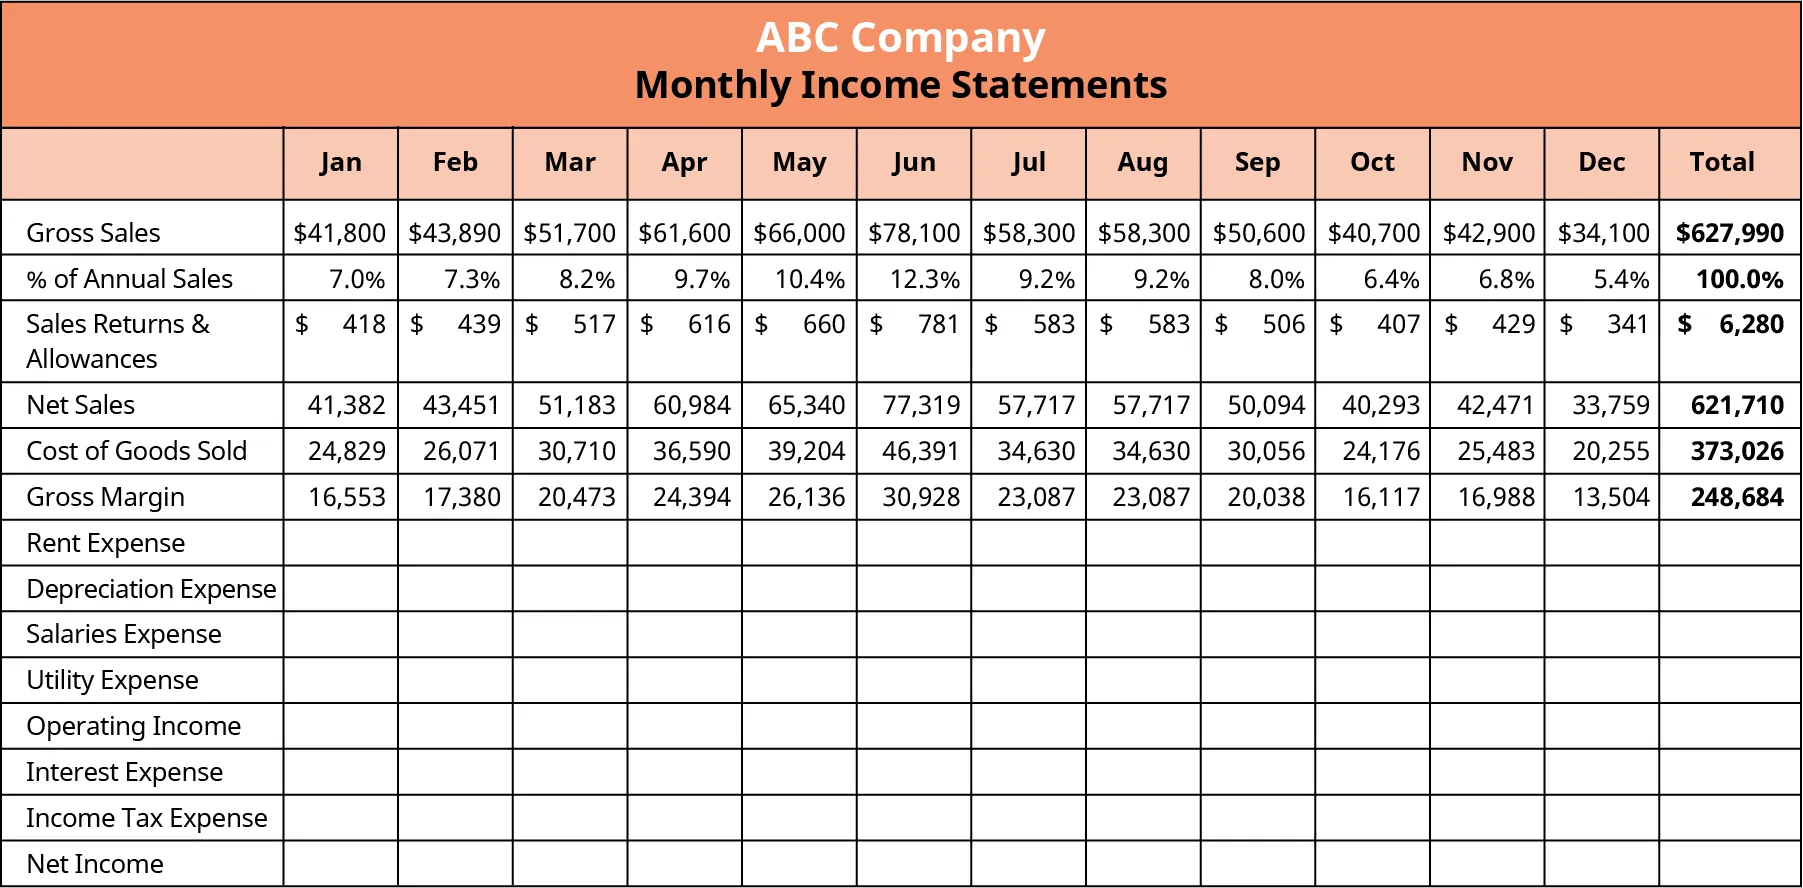 The monthly income statement of ABC company shows gross sales by month: January - $41,800; February - $43,890; March - $51,700; April - $61,600; May - $66,000; June - $78,100; July - $58,300; August - $58,300; September - $50,600; October - $40,700; November - $42,900; and December - $34,100.  The total sales for the year is $627,990. It also shows the % of annual sales by month: January – 7%; February – 7.3%; March – 8.2%; April – 9.7%; May – 10.4%; June – 12.3%; July – 9.2%; August – 9.2%; September – 8.0%; October – 6.4%; November – 6.8%; and December – 5.4%.  The total percentage for all of the months equals 100%. The sales returns and allowances by month are: January - $418; February - $439; March - $517; April - $616; May - $660; June - $781; July - $583; August - $583; September - $506; October - $407; November - $429; December - $341. The total sales returns and allowances for the year are $6,280. The net sales by month are: January - $41,382; February - $43451; March - $51,183; April - $60,984; May - $65,340; June - $77,319; July - $57,717; August - $57,717; September - $50,094; October - $40,293; November - $42,471; December - $33,759. The total net sales for the year are $621,710. The cost of goods sold by month are: January - $24,829; February - $26,071; March - $30,710; April - $36,590; May - $39,204; June - $46,391; July - $34,630; August - $34,630; September - $30,056; October - $24,176; November - $25,483; and December - $20,255. The total cost of goods sold for the year are $373,026. The gross margin by month are: January - $16,553; February - $17,380; March - $20,473; April - $24,394; May - $26,136; June - $30,928; July - $23,087; August - $23,087; September - $20,038; October - $16,117; November - $16,988; and December - $13,504. The total gross margin for the year is $248,684. There are blank cells for each month for rent expense, depreciation expense, salaries expense, utility expense, operating income, interest expense, income tax expense, and net income.